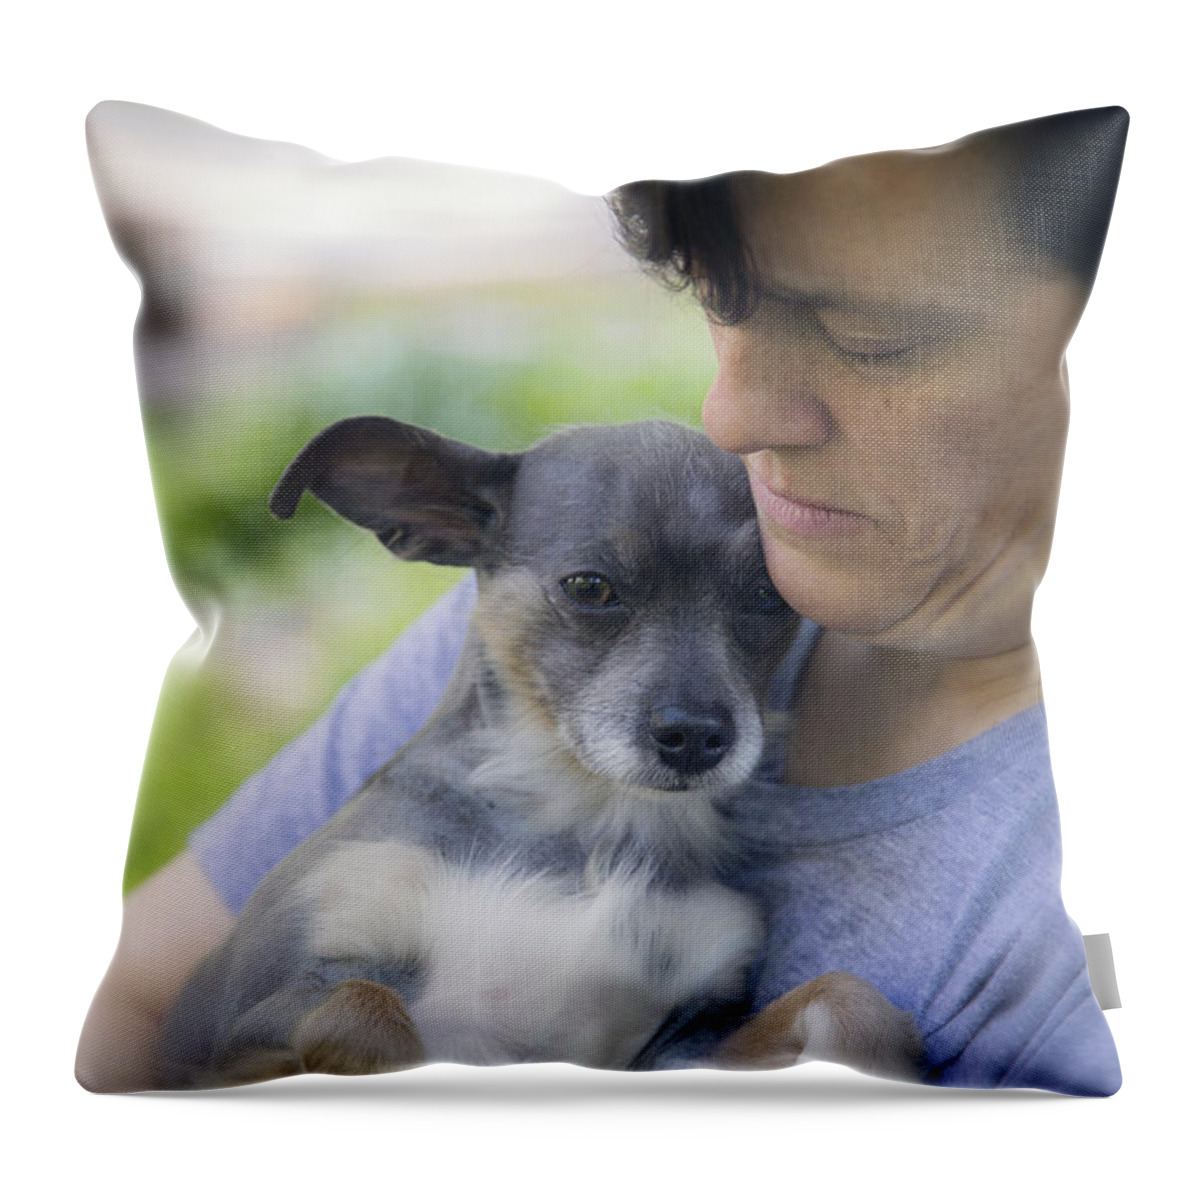 Dog Throw Pillow featuring the photograph Rescue by Edward Fielding